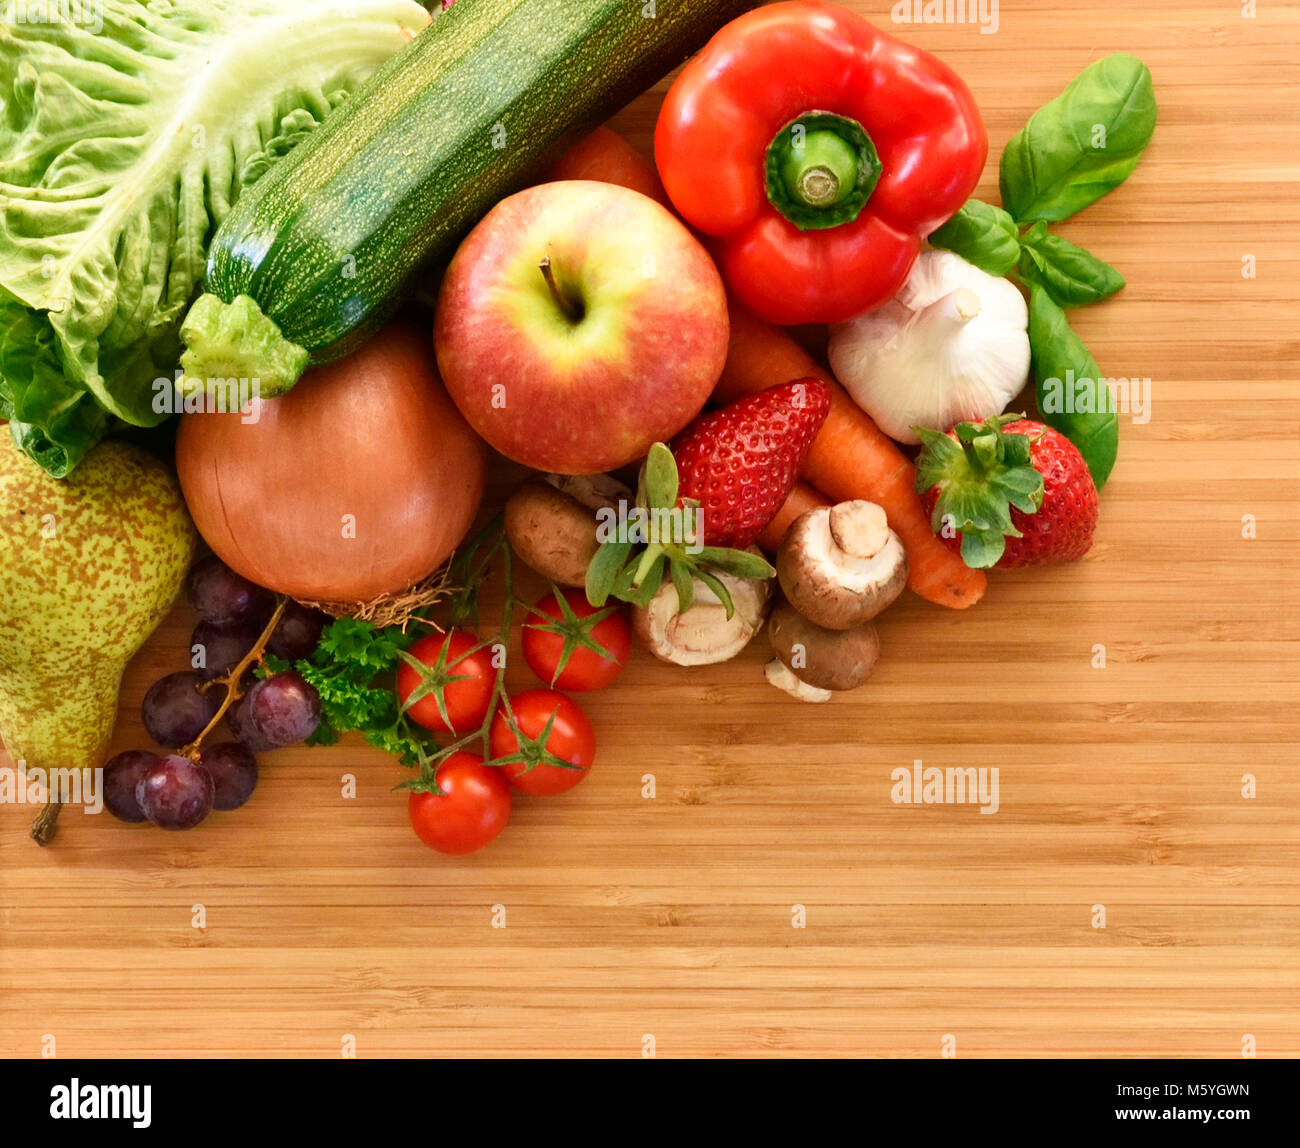 Vegetables and fruits composition or arrangement on a bamboo cutting board. Fresh products, red bell pepper, apple, carrots, onion, garlic, strawberry Stock Photo